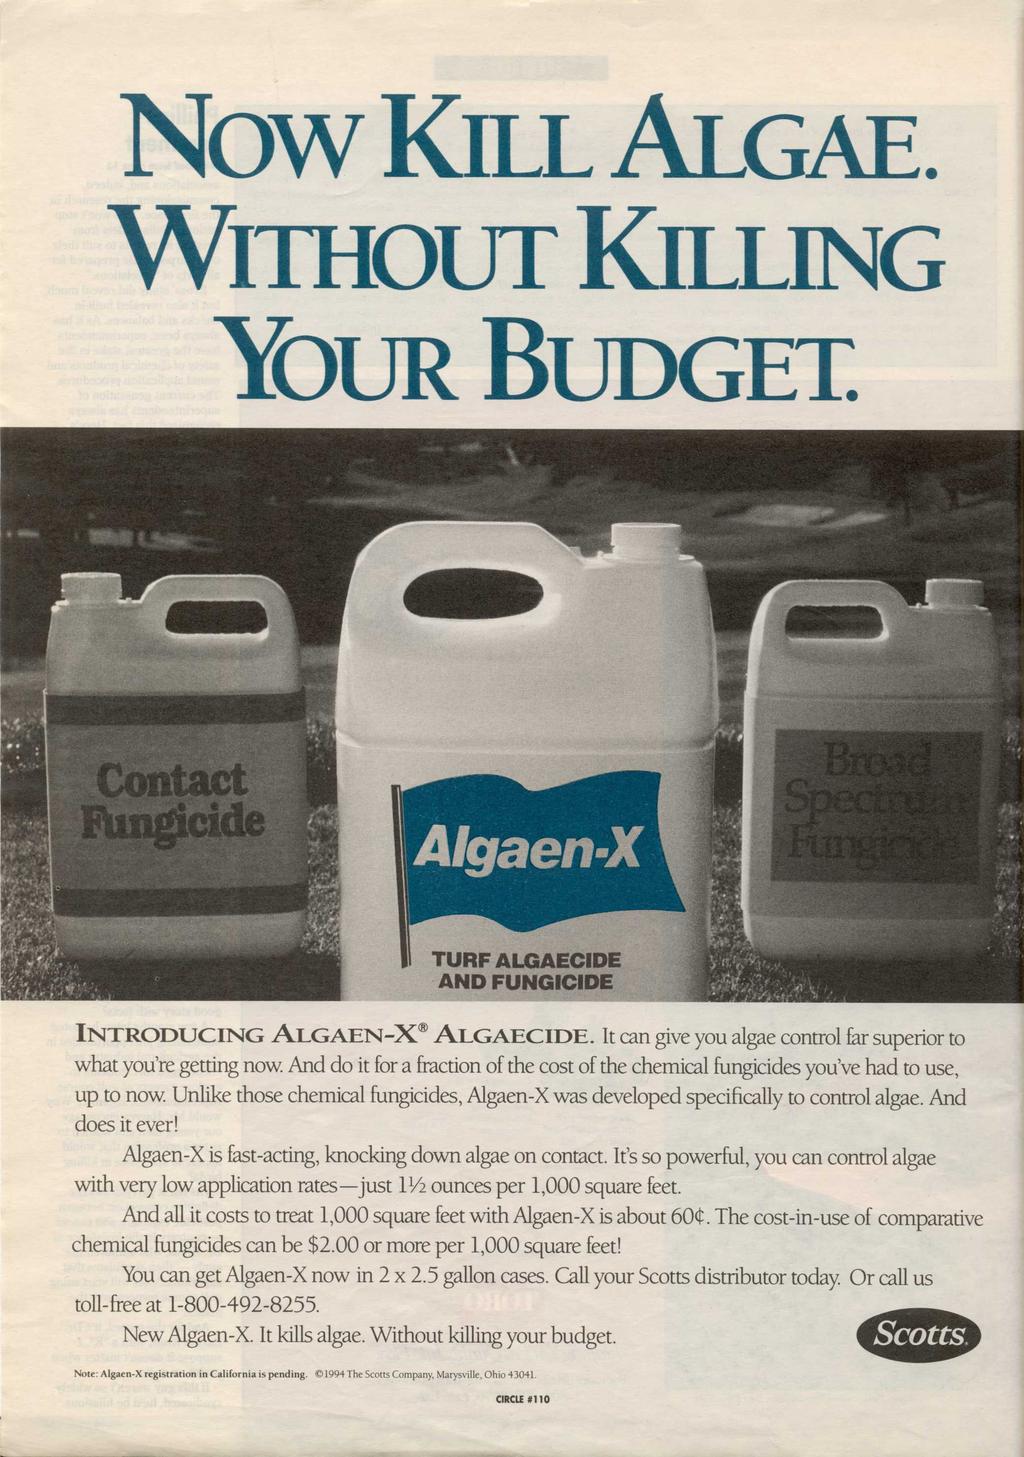 Now KILL ALGAE. WITHOUT KILLING YOUR BUDGET. TURF ALGAECIDE AND FUNGICIDE INTRODUCING ALGAEN-X ALGAECIDE. It can give you algae control far superior to what you're getting now.